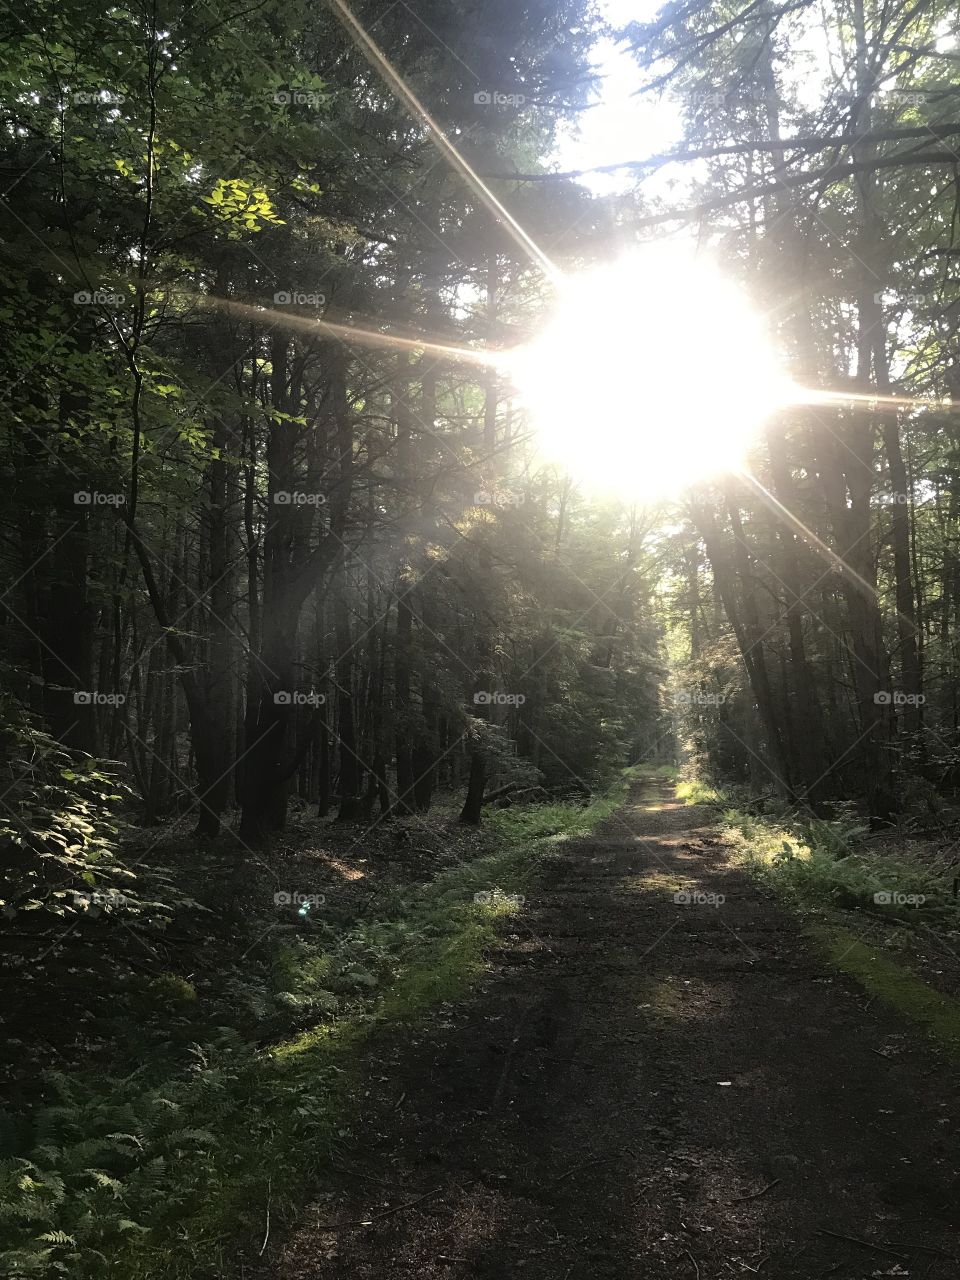 An early morning hike through nature reveals a beautifully lit path of sunshine. 